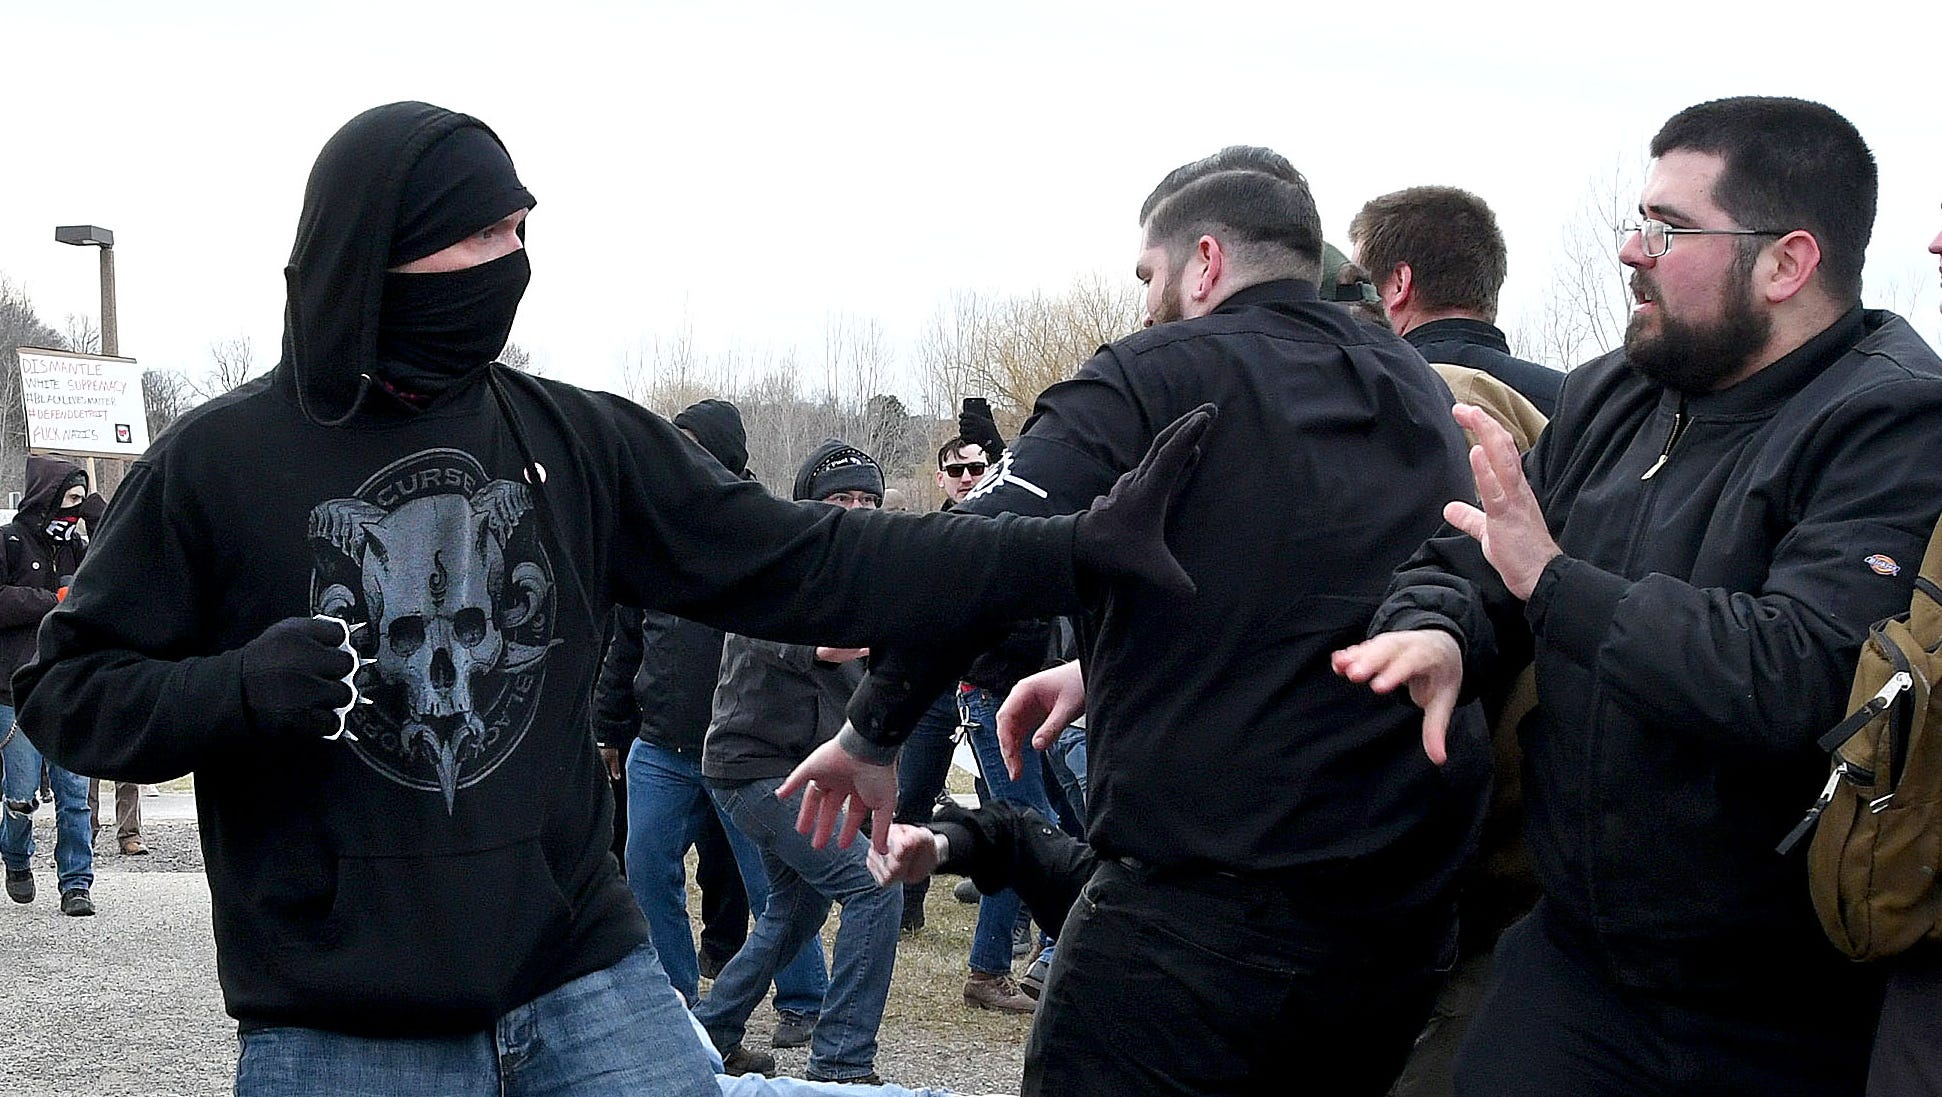 An ANTIFA sympathizer  attacks white nationalist Matthew Heimbach with a spiked "knuckle duster" as Heimbach attempts to enter the MSU Pavilion for Richard Spencer's speech.